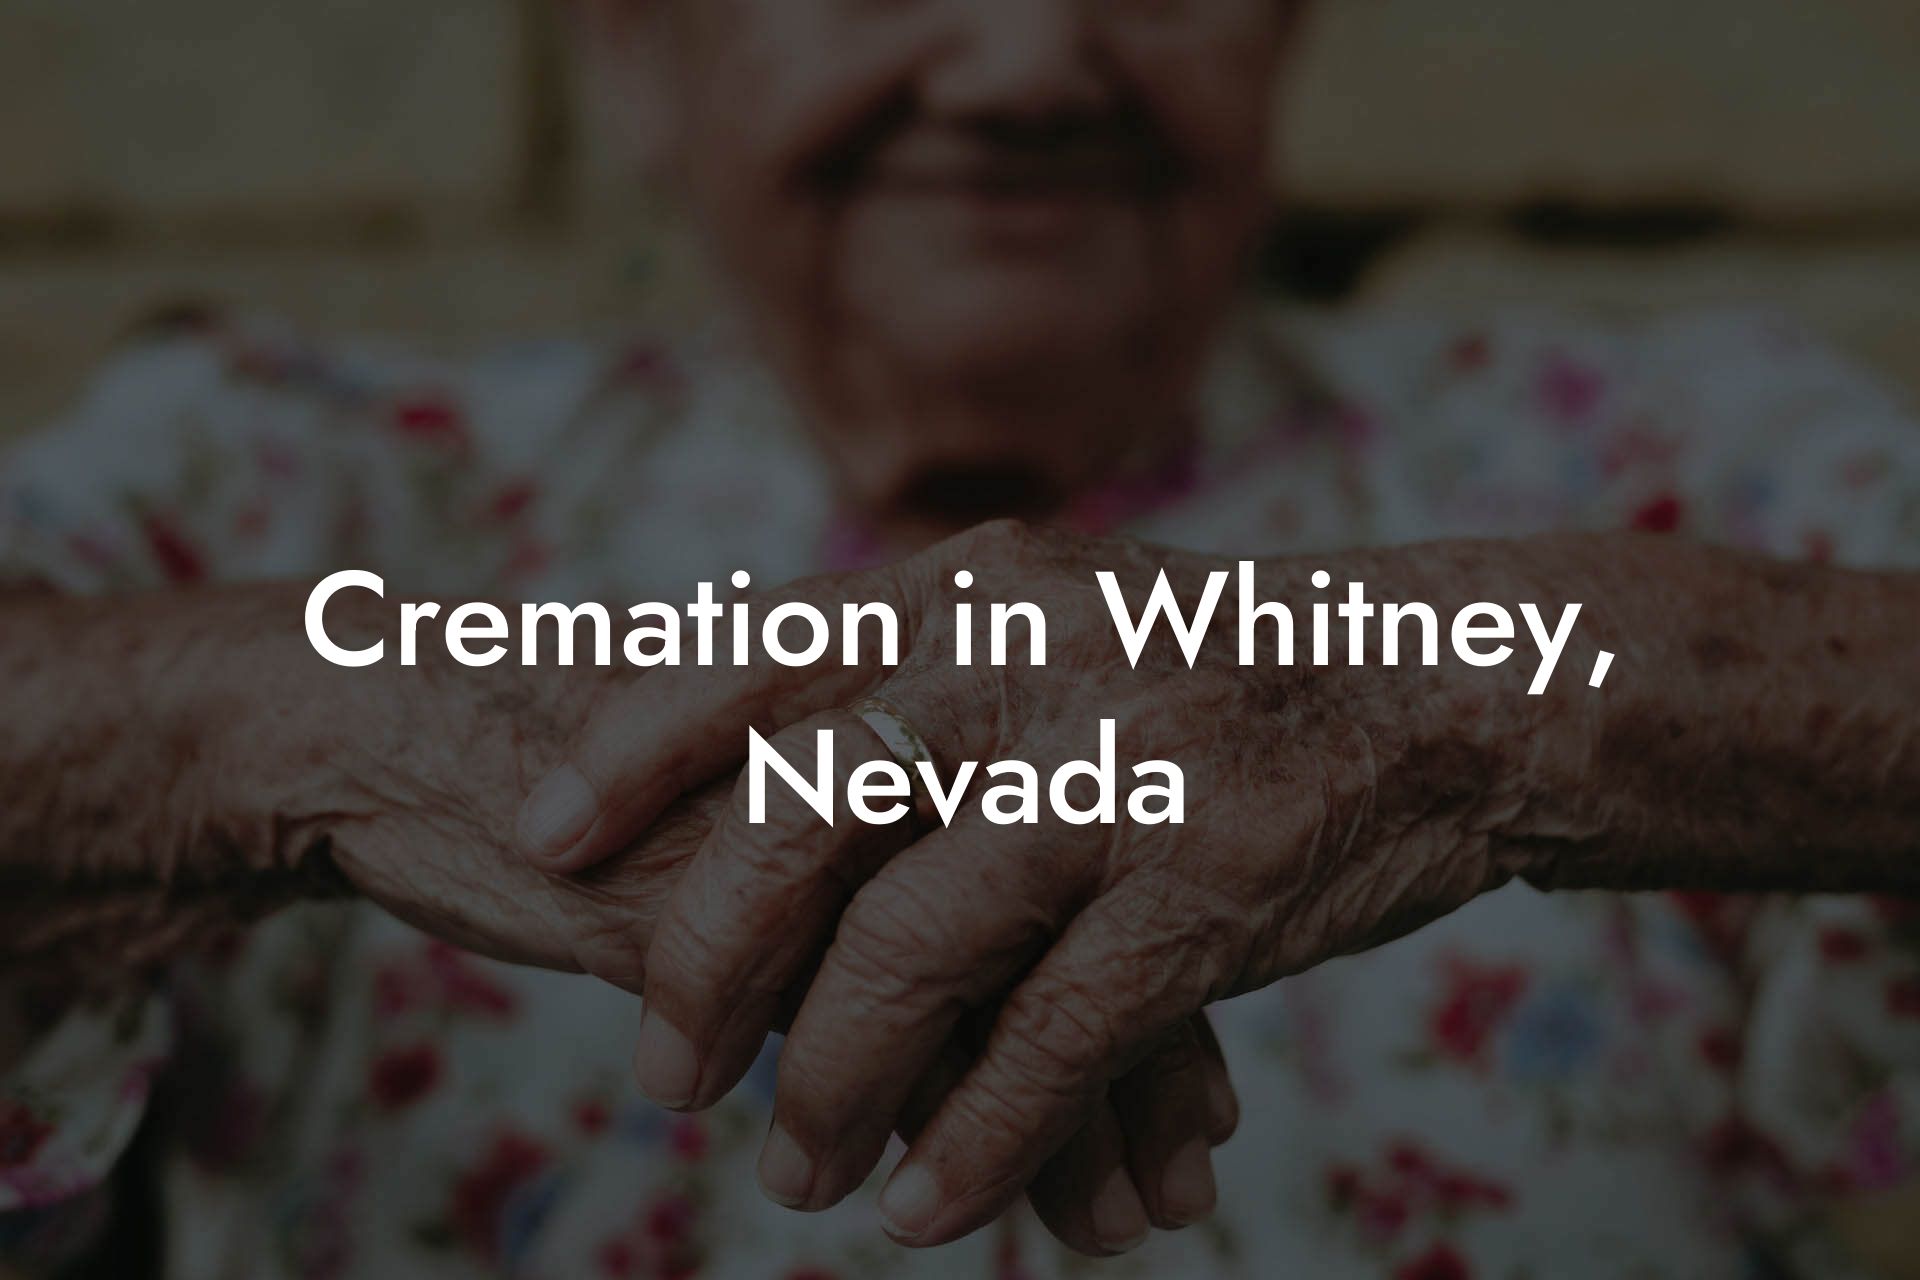 Cremation in Whitney, Nevada